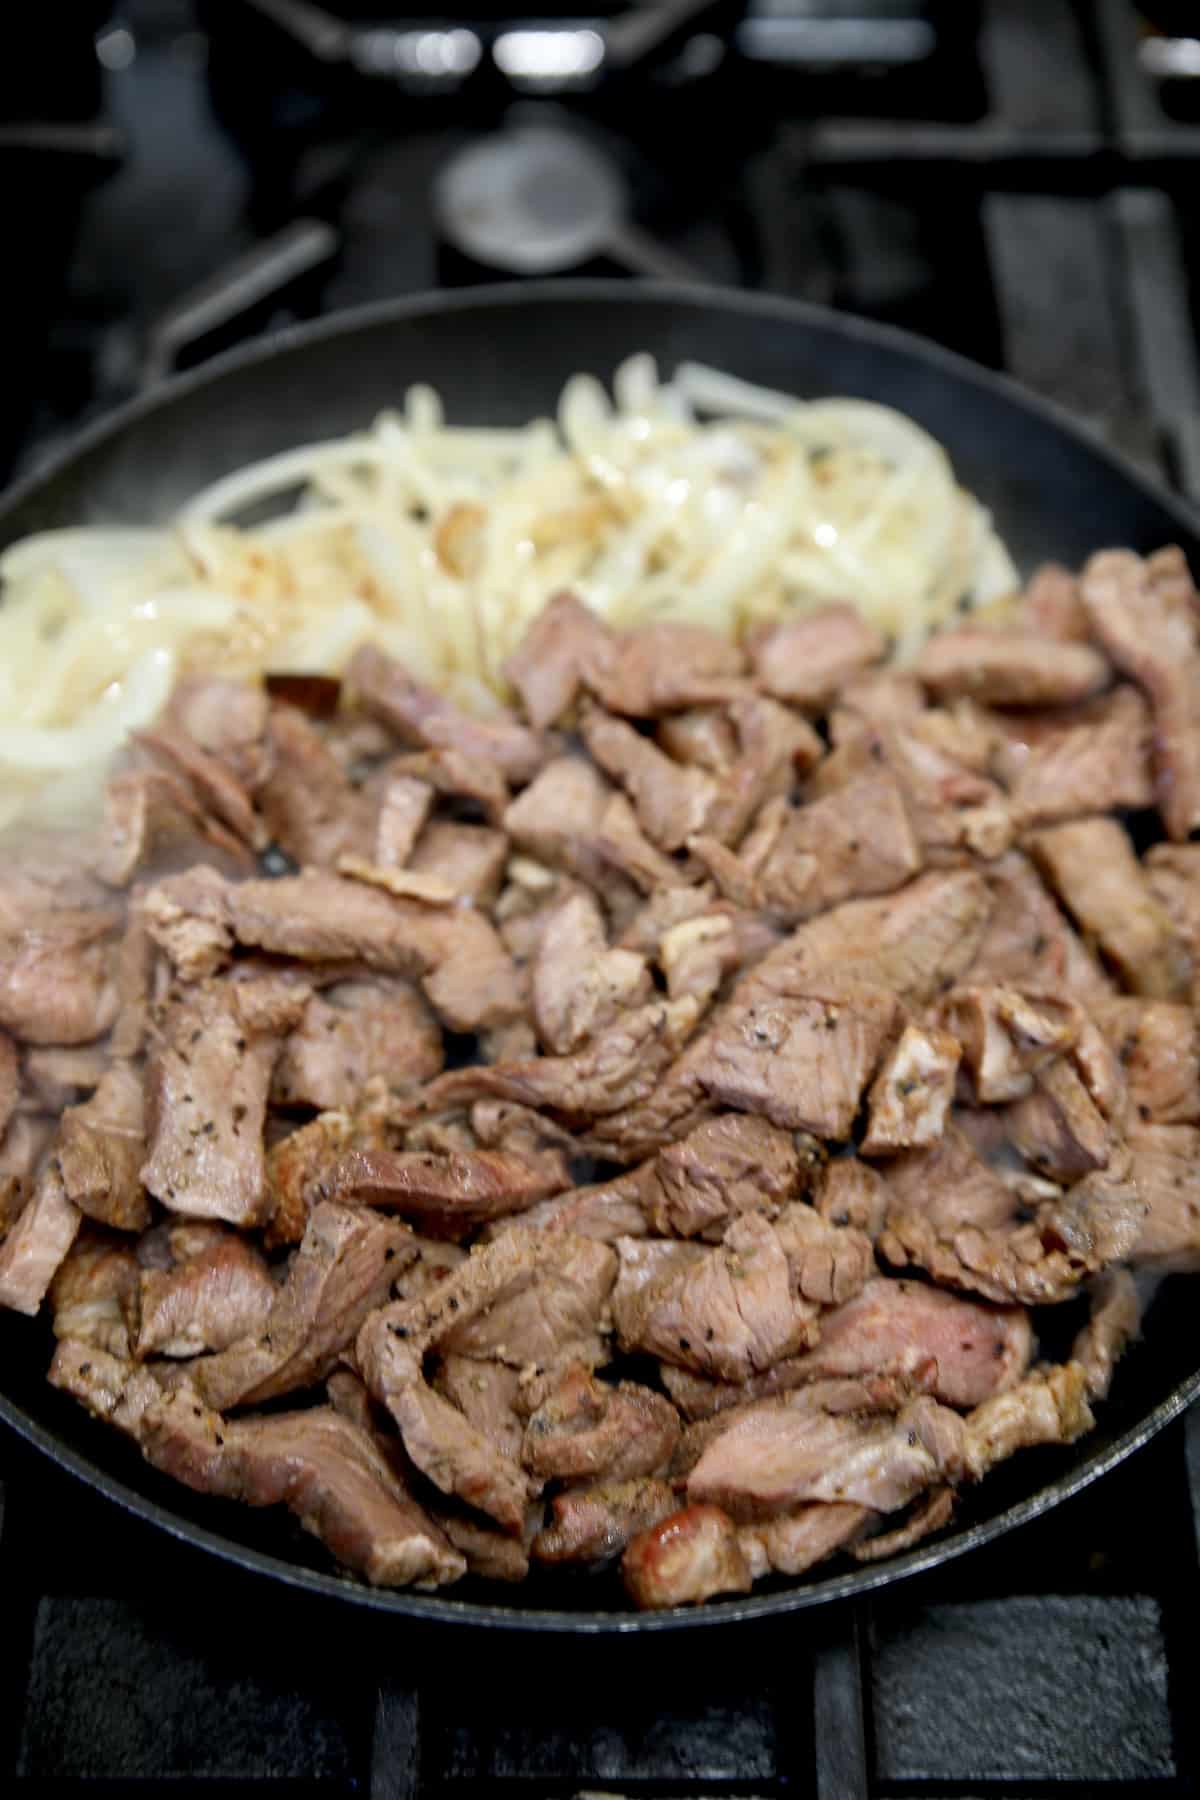 Skillet with onions and sliced steak.